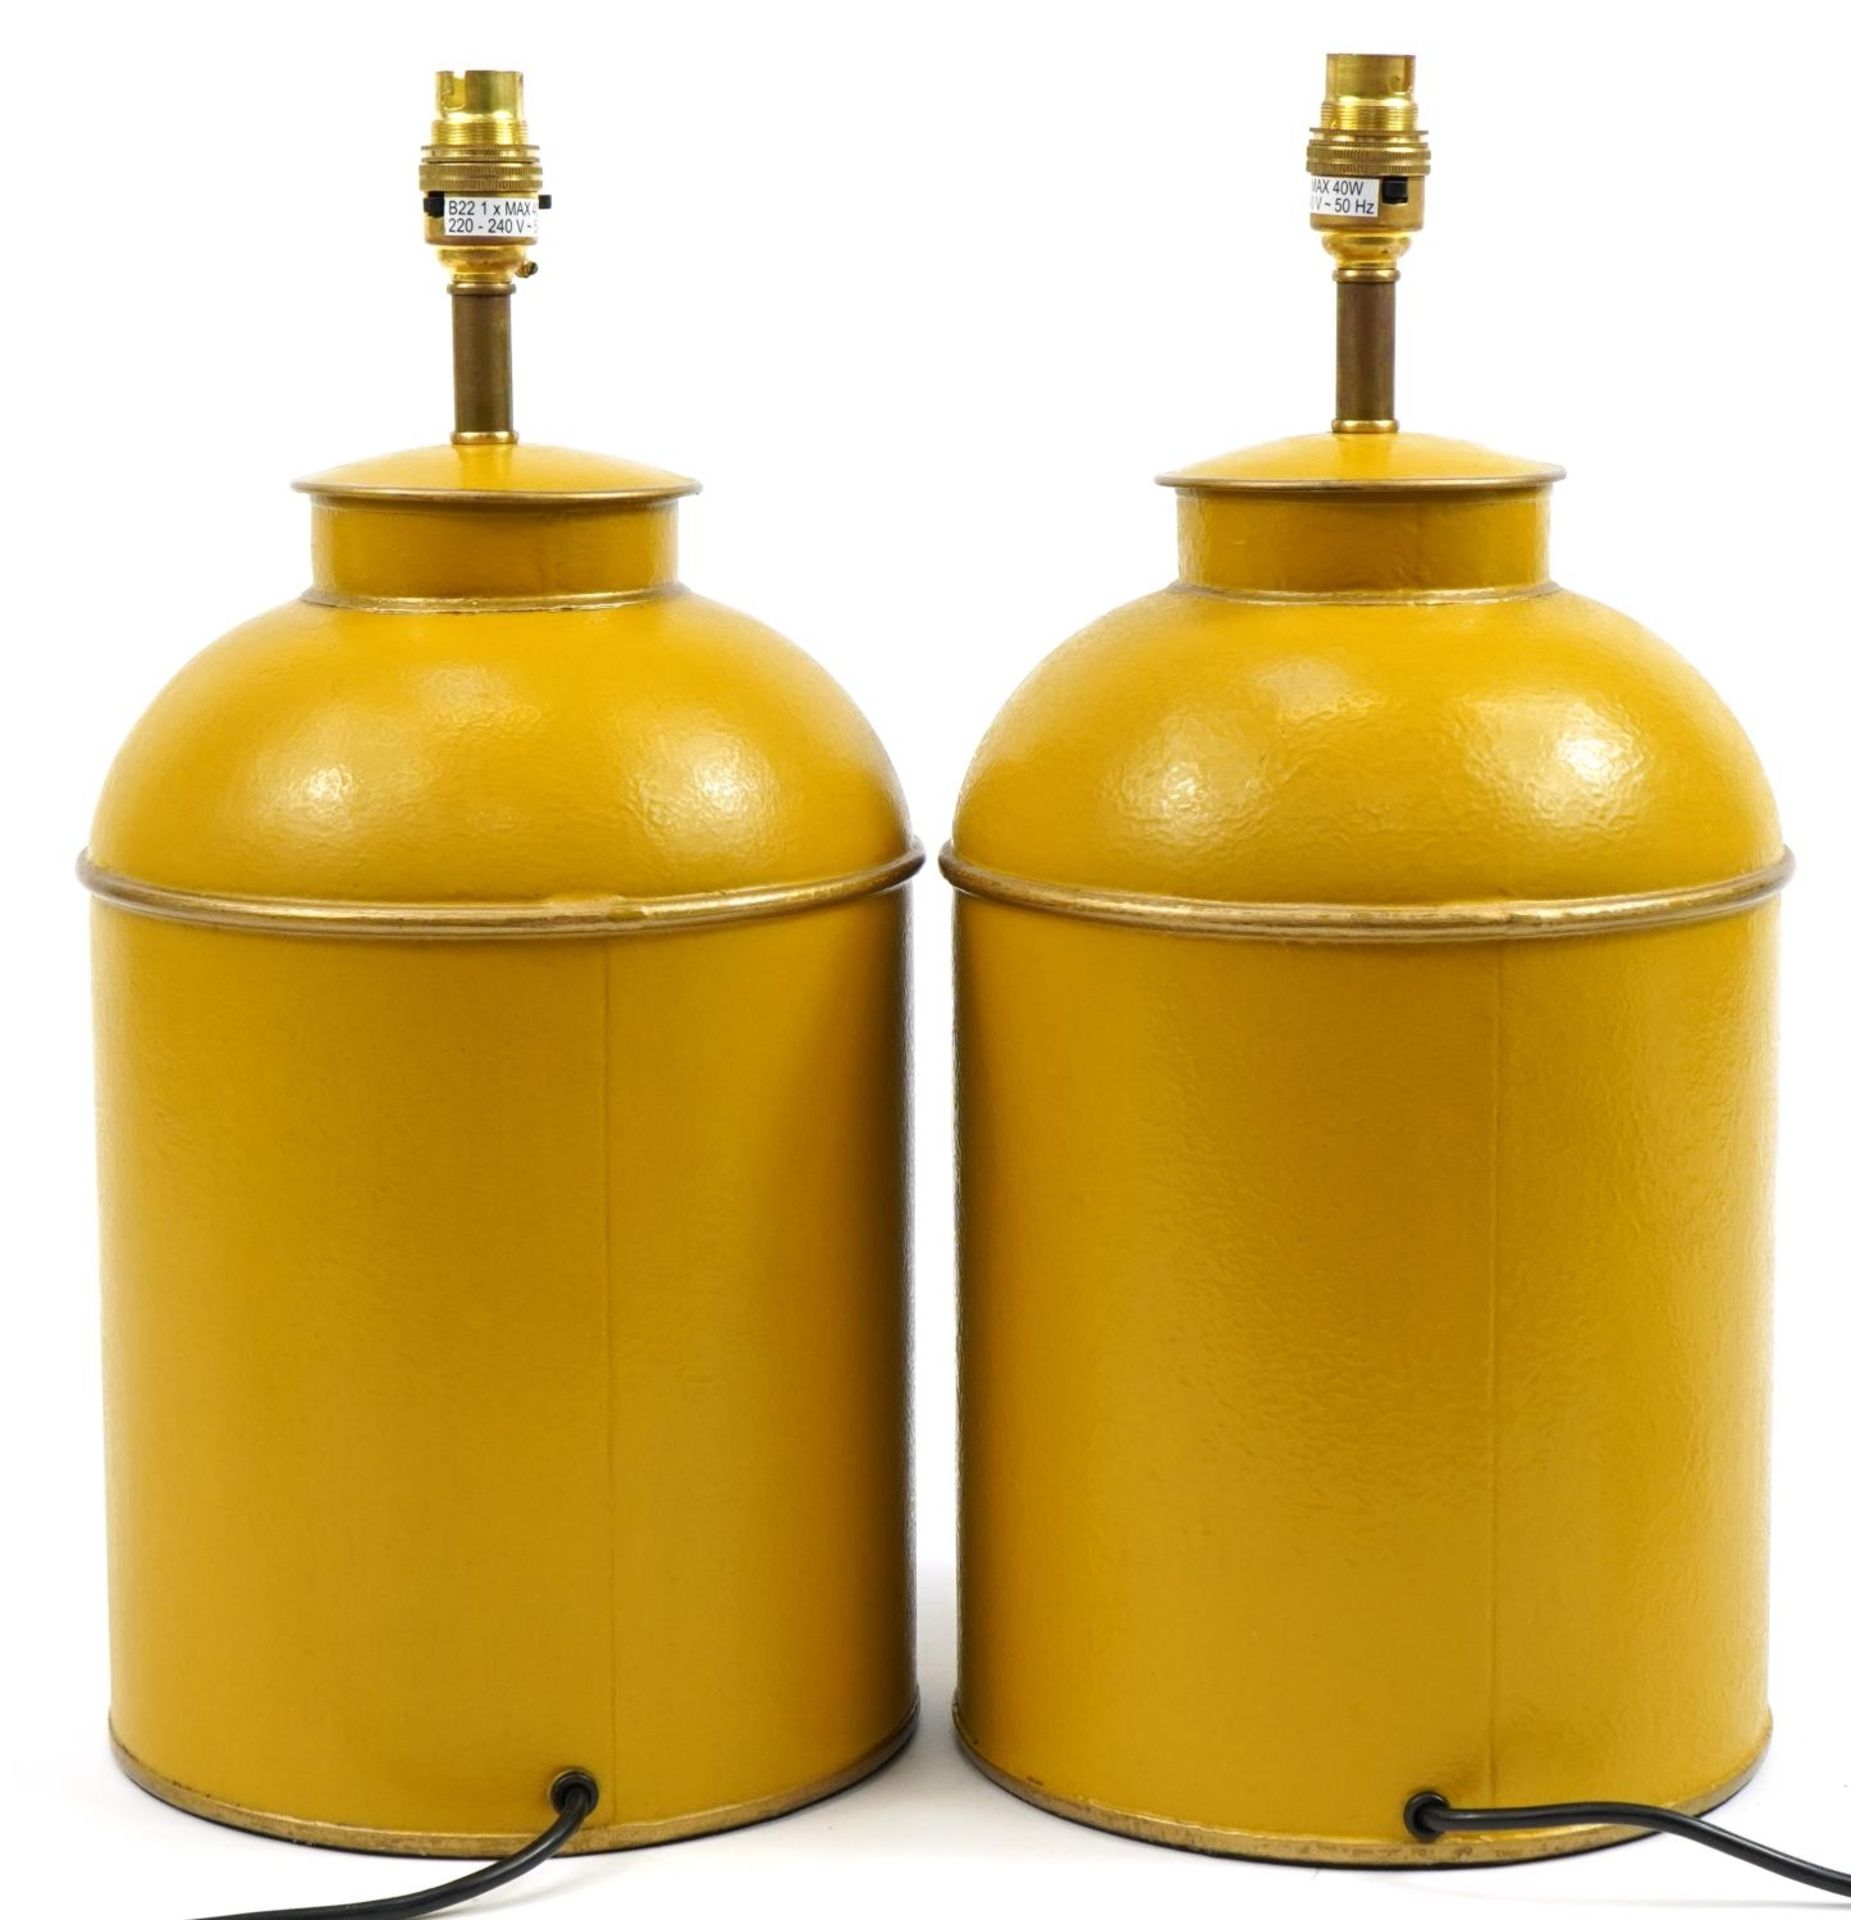 Pair of Toleware metal lamps, each hand painted with heraldic crests, each 45cm high including - Image 2 of 3